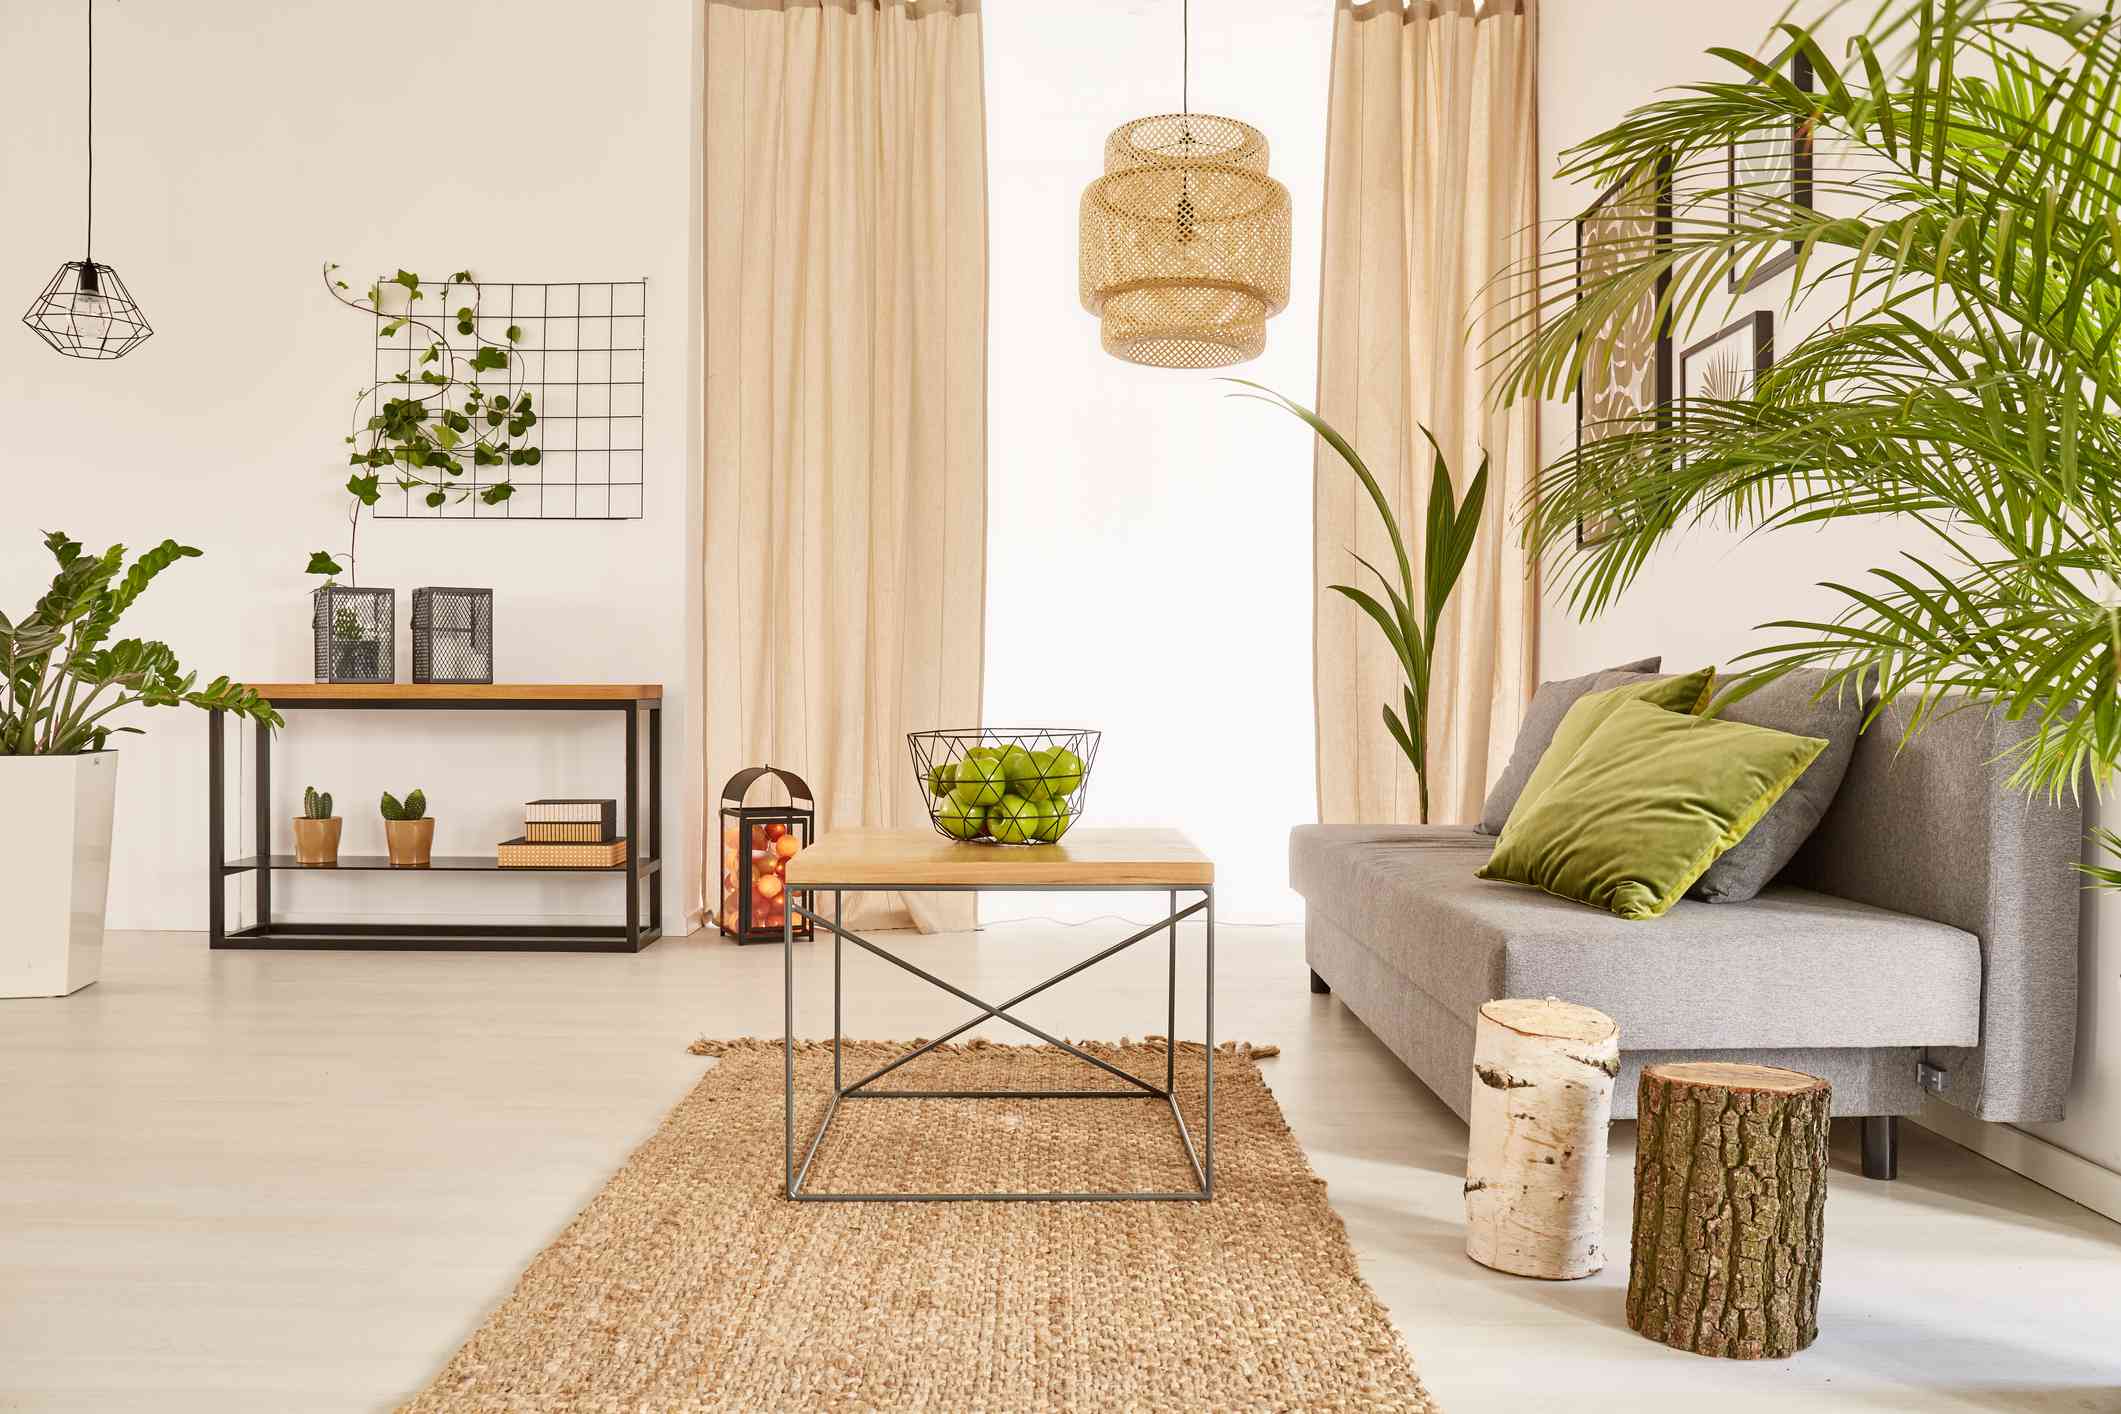 The Best Ways To Incorporate Feng Shui In Your Home